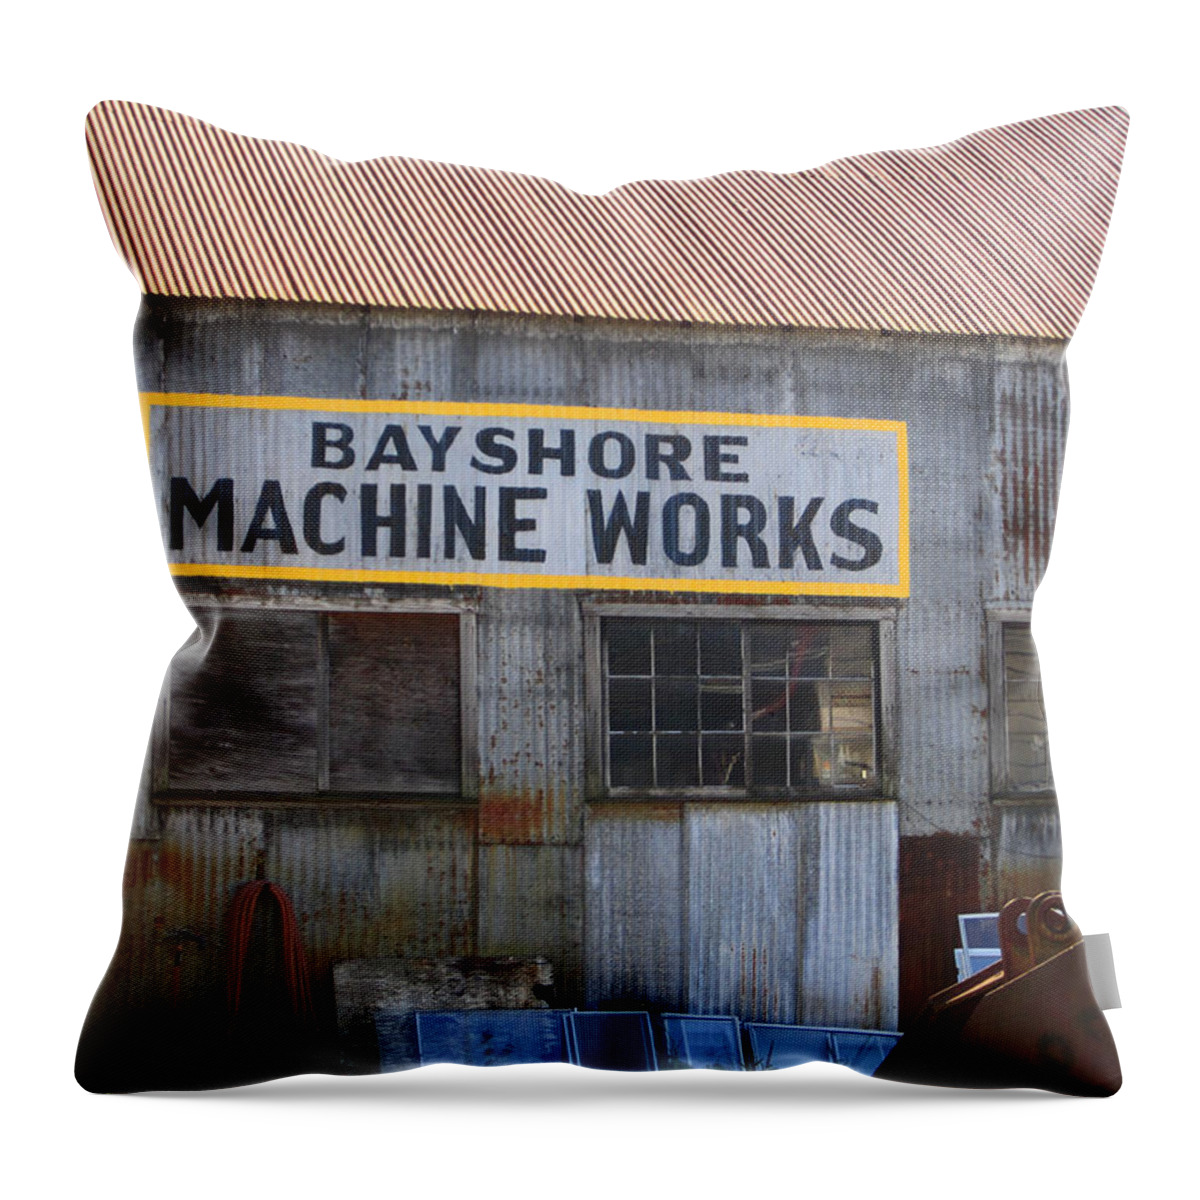 Bayshore Machine Works Sign Throw Pillow featuring the photograph Bayshore Machine Works by Kym Backland